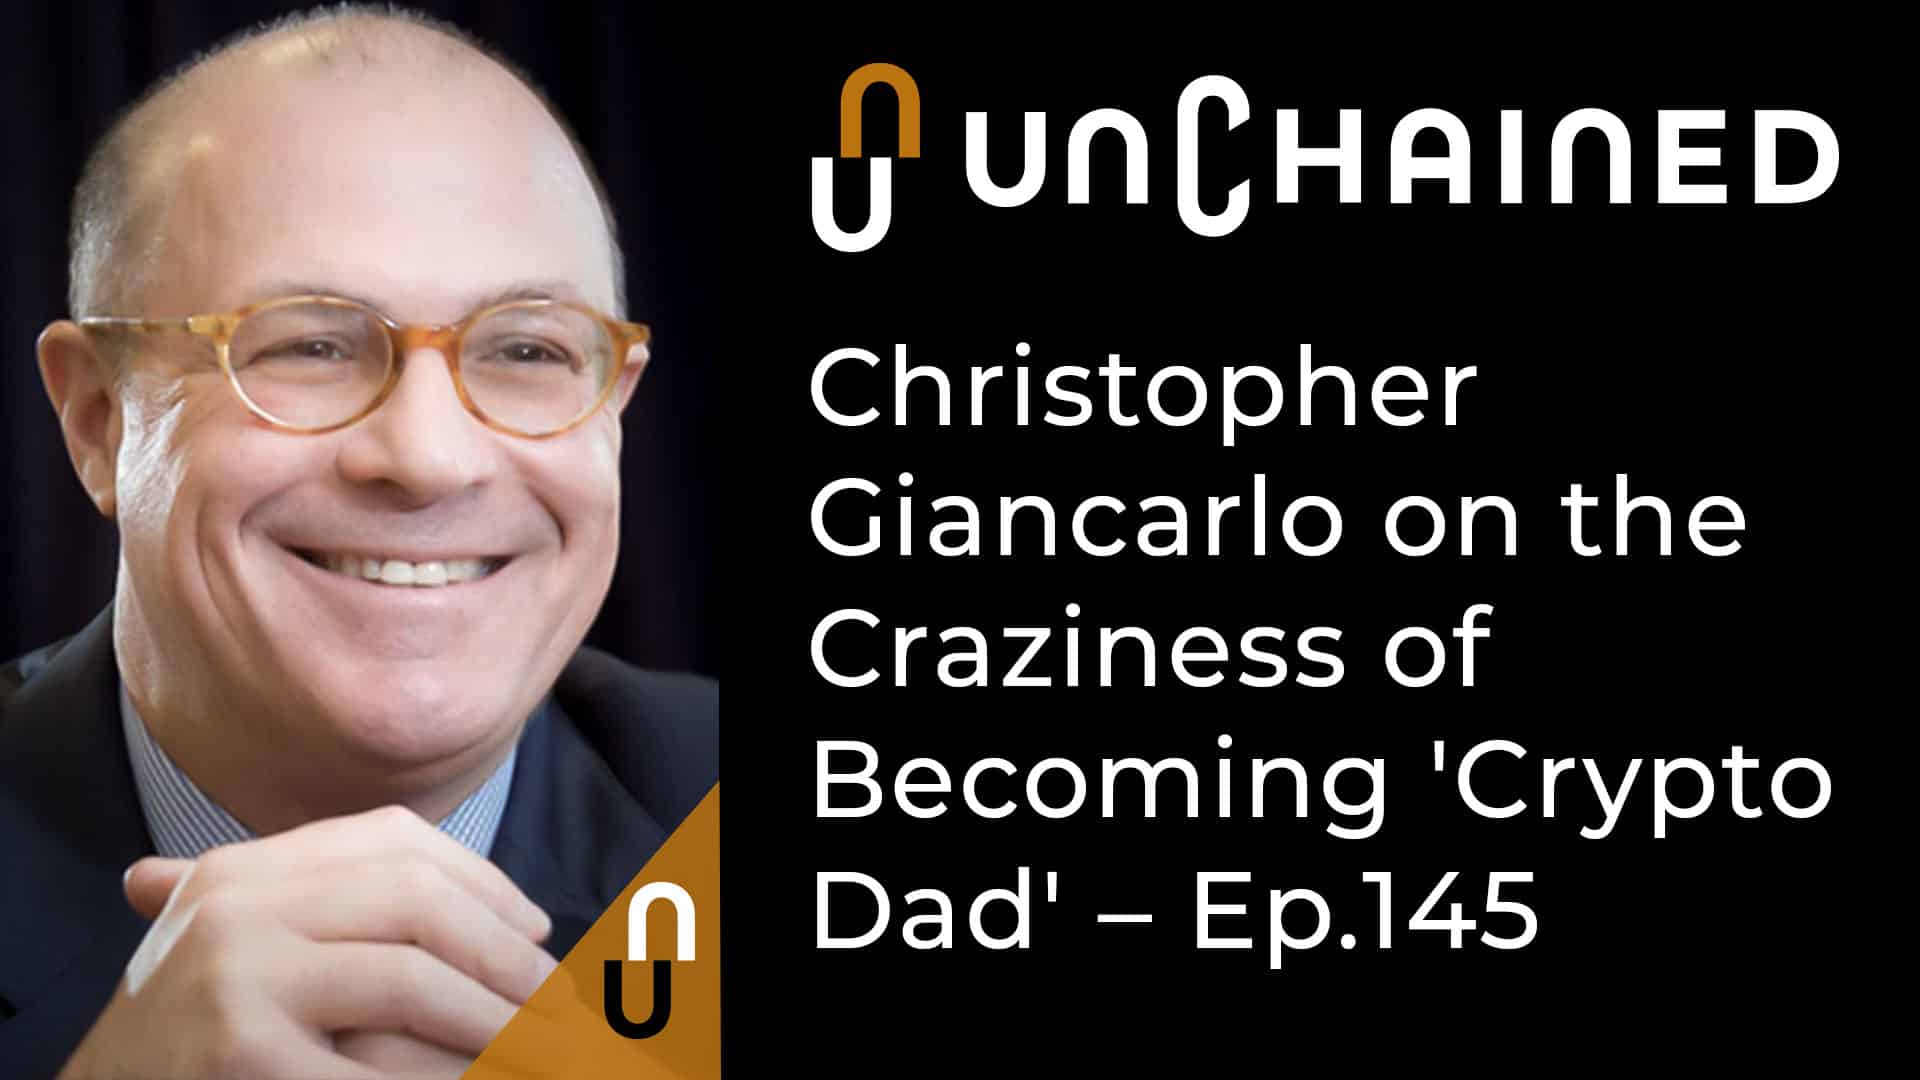 Christopher Giancarlo on the Craziness of Becoming 'Crypto Dad